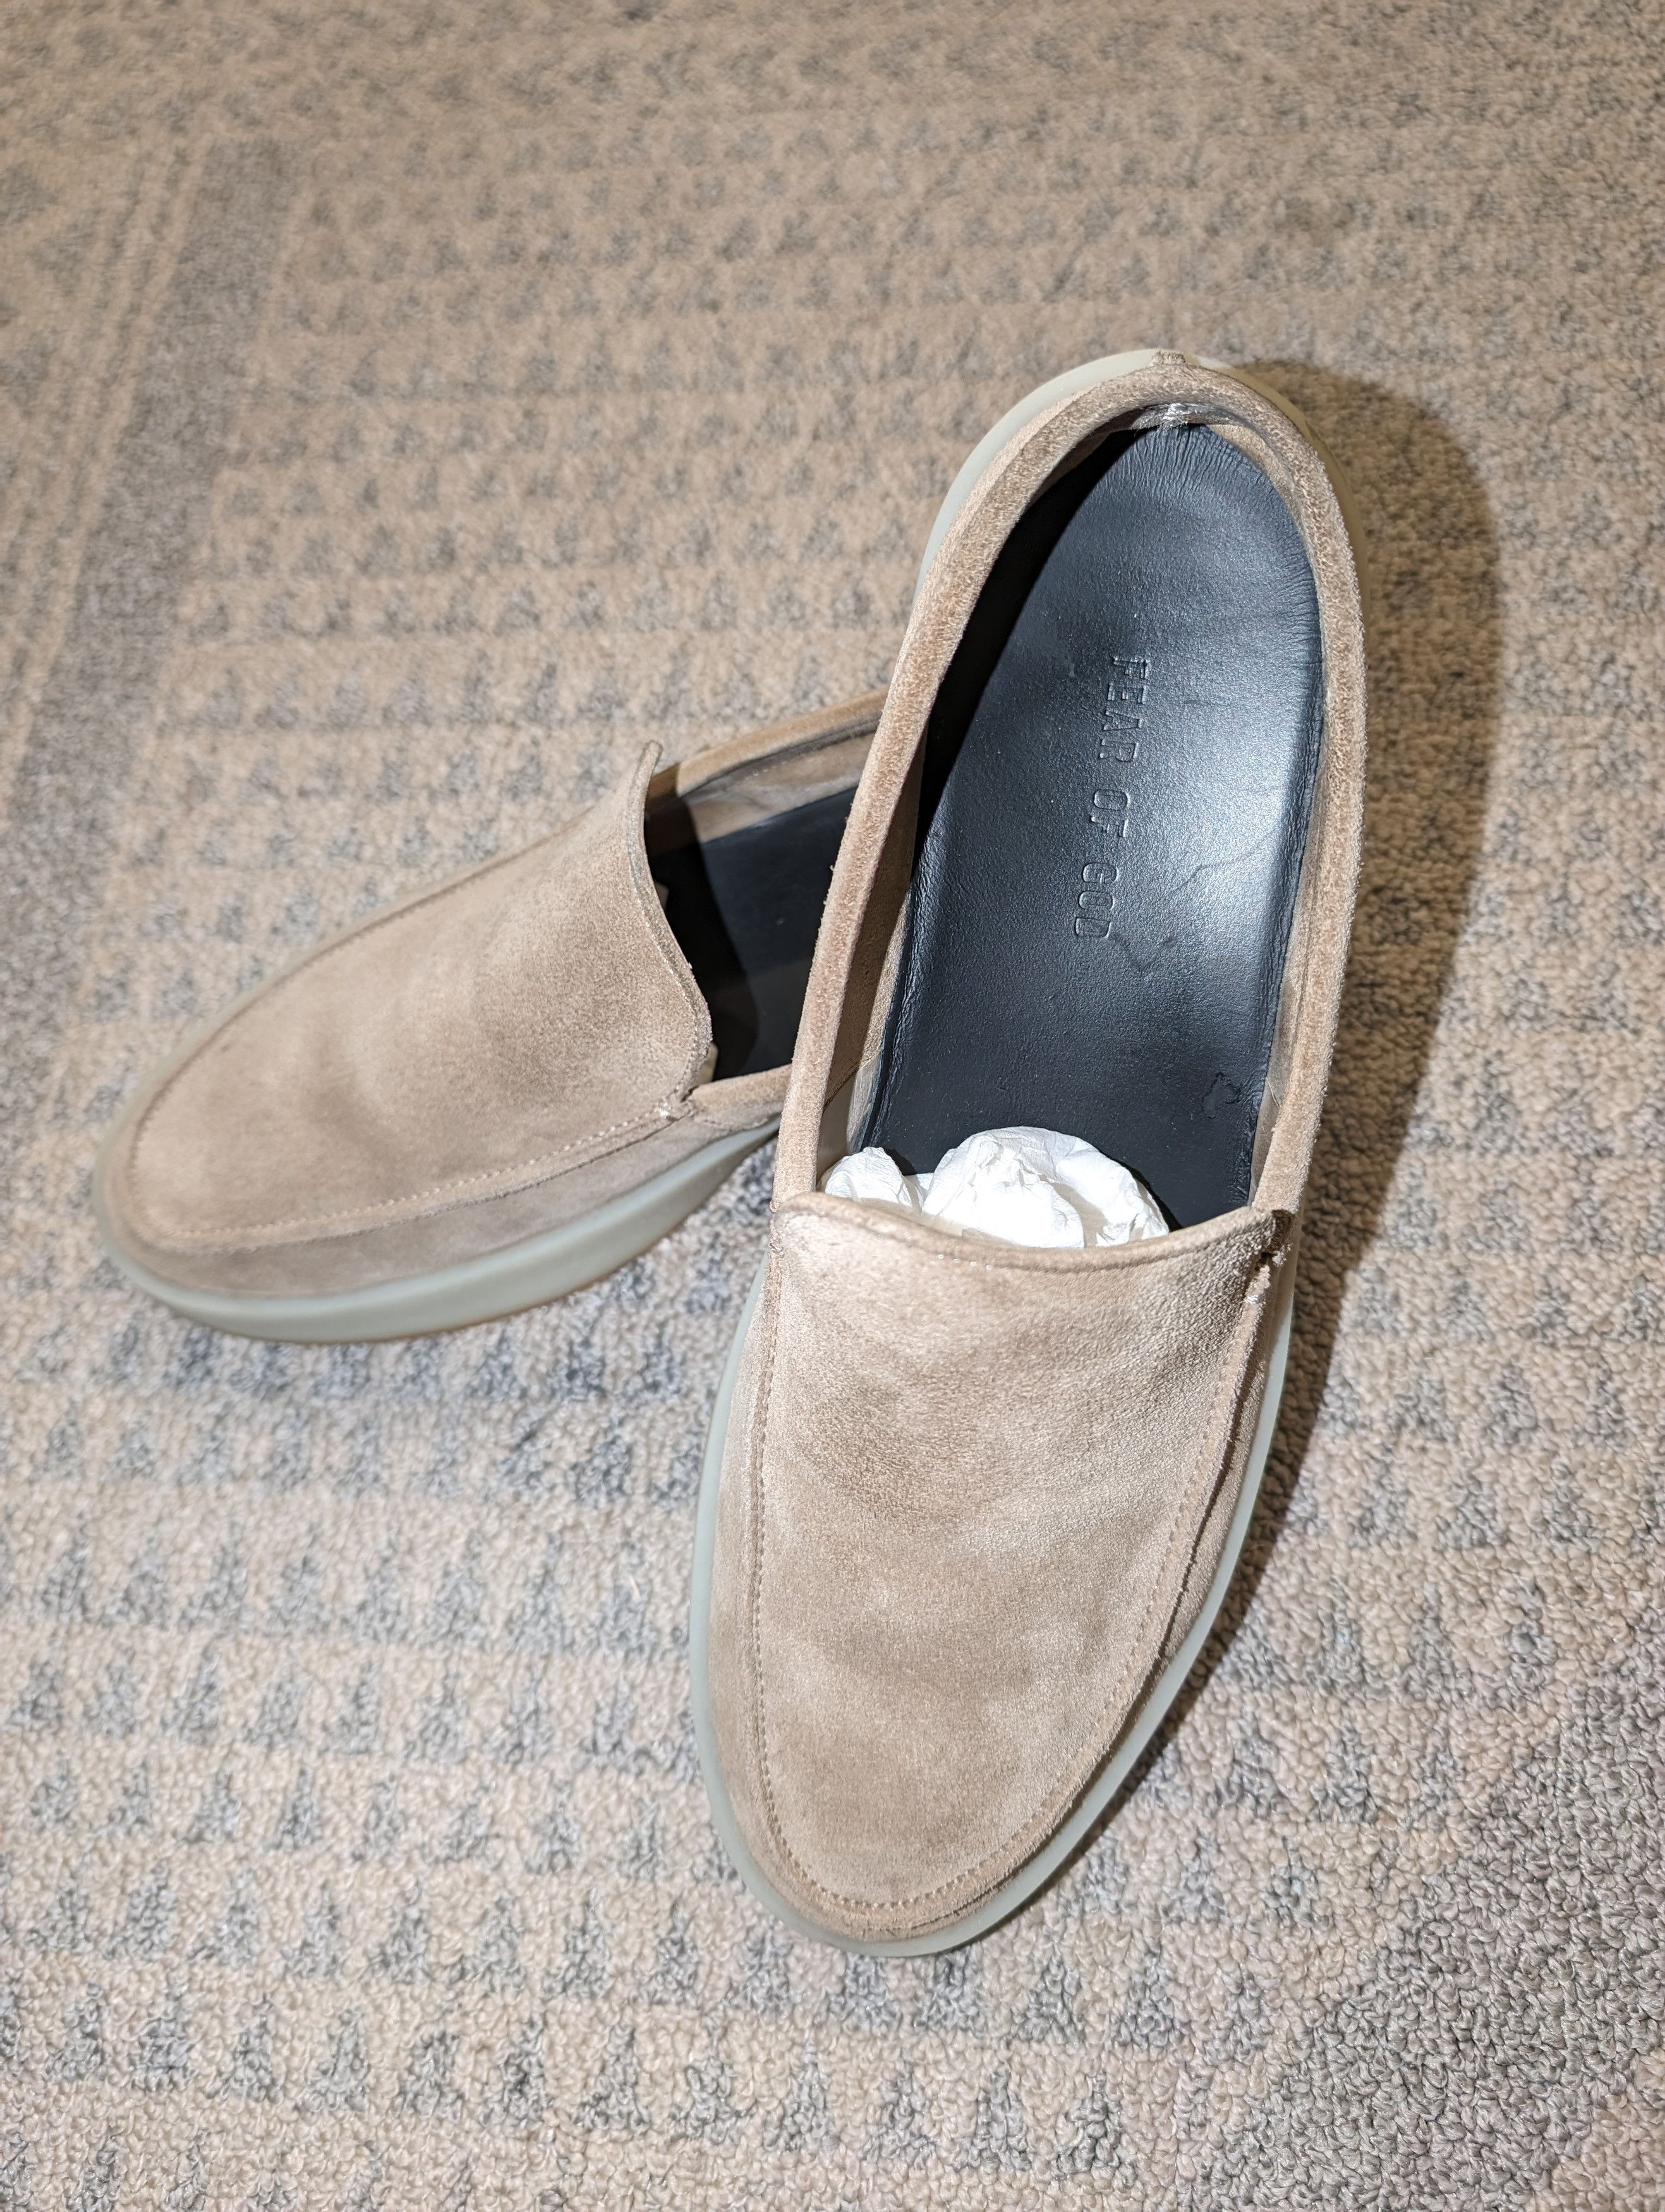 coloFEAR OF GOD 7th loafer スエード jerrylorenzo